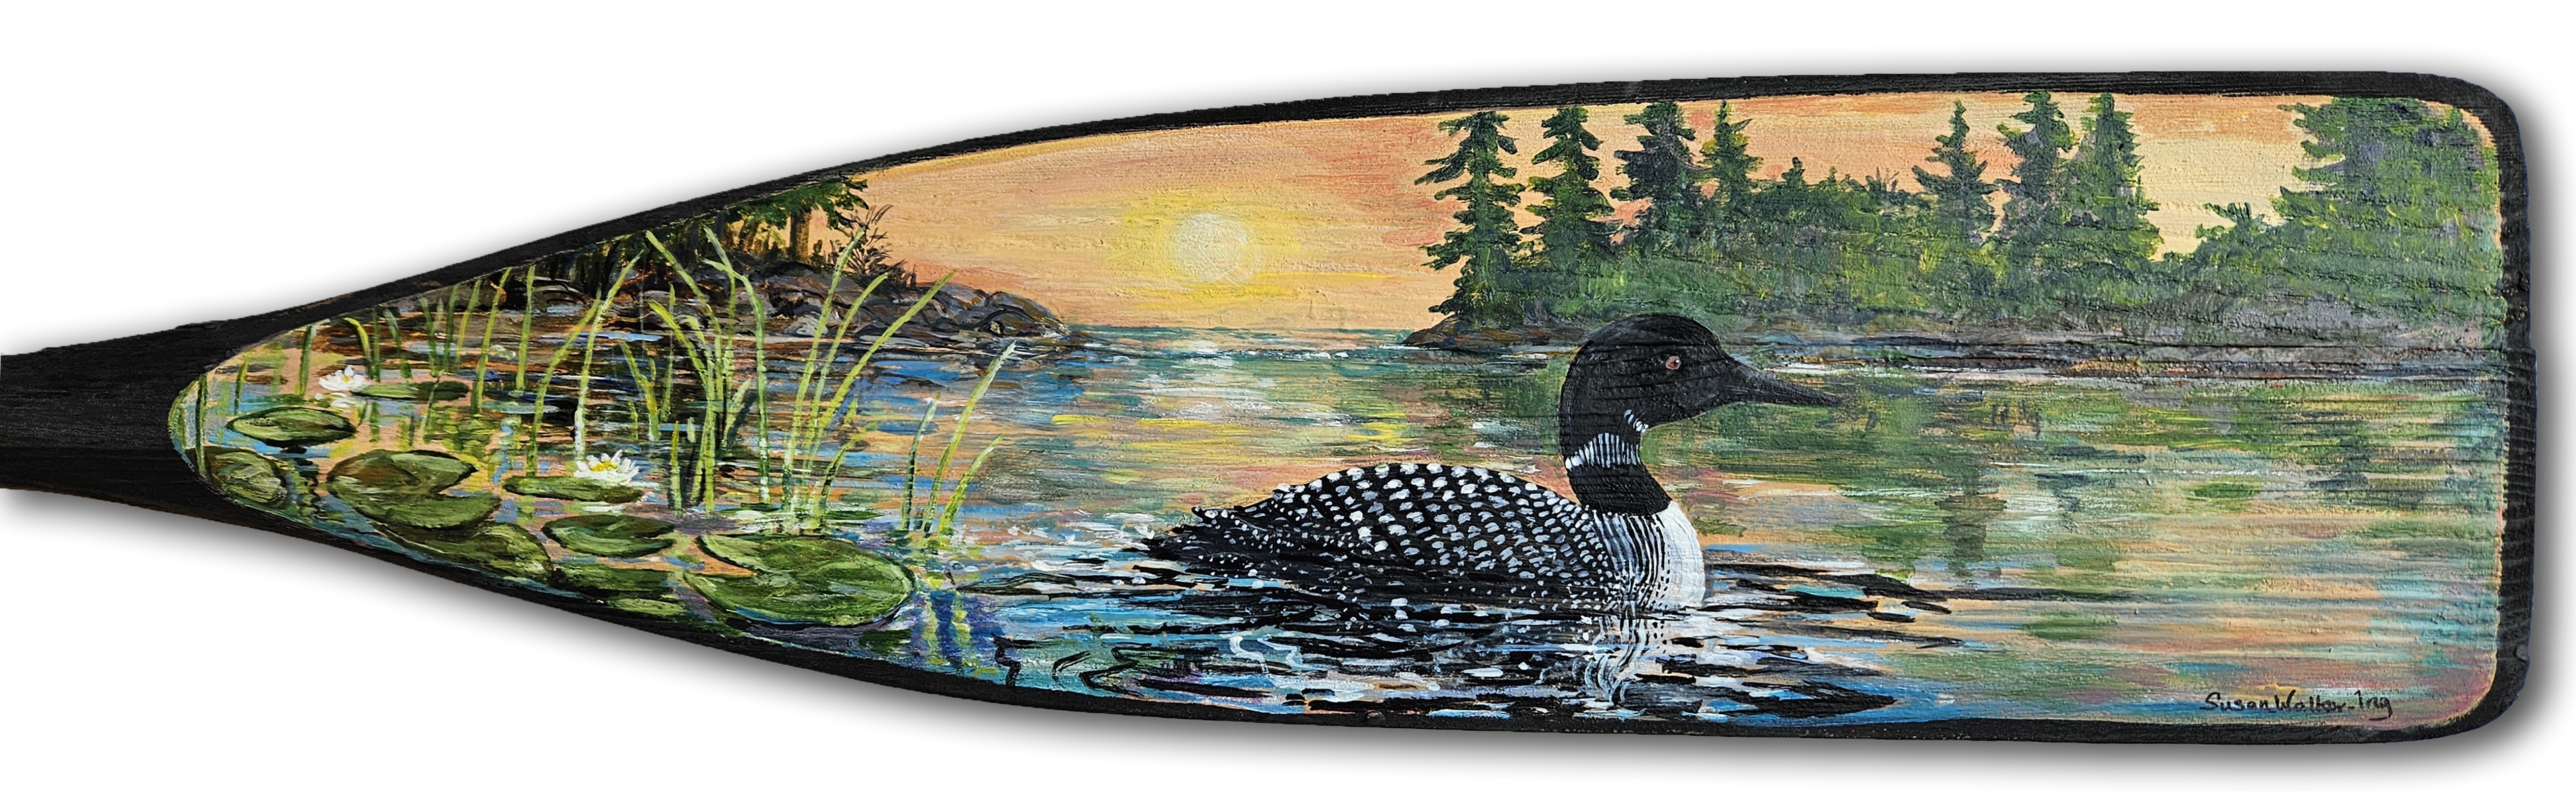 Loon on the water at sunset, painted on a paddle.